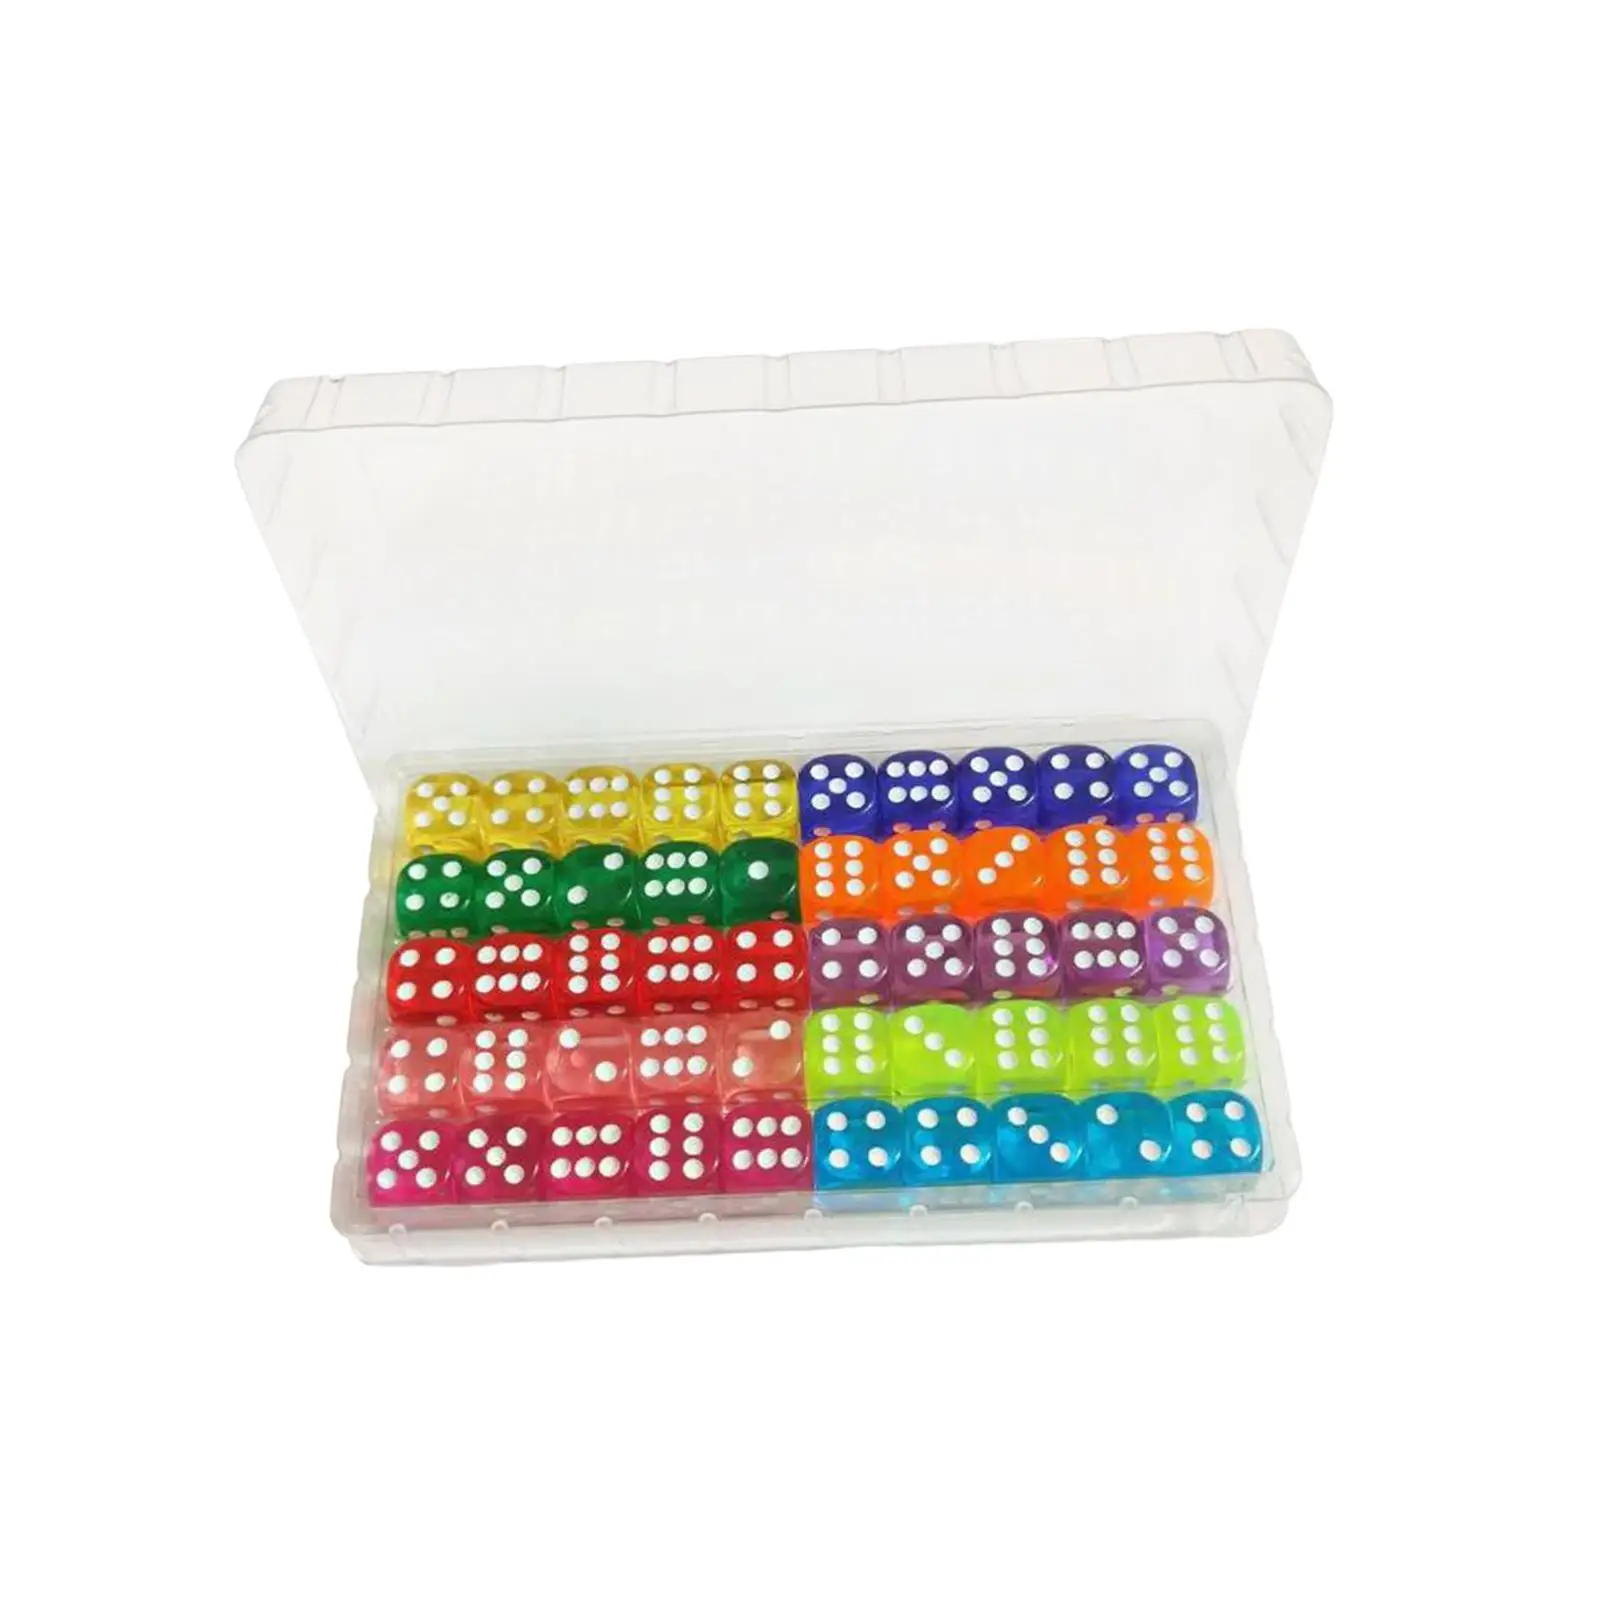 50x 6 Sided Dices Party Favors Entertainment Toys 16mm Dices Math Counting Teaching Aids Game Dices for Bar Card Game Board Game